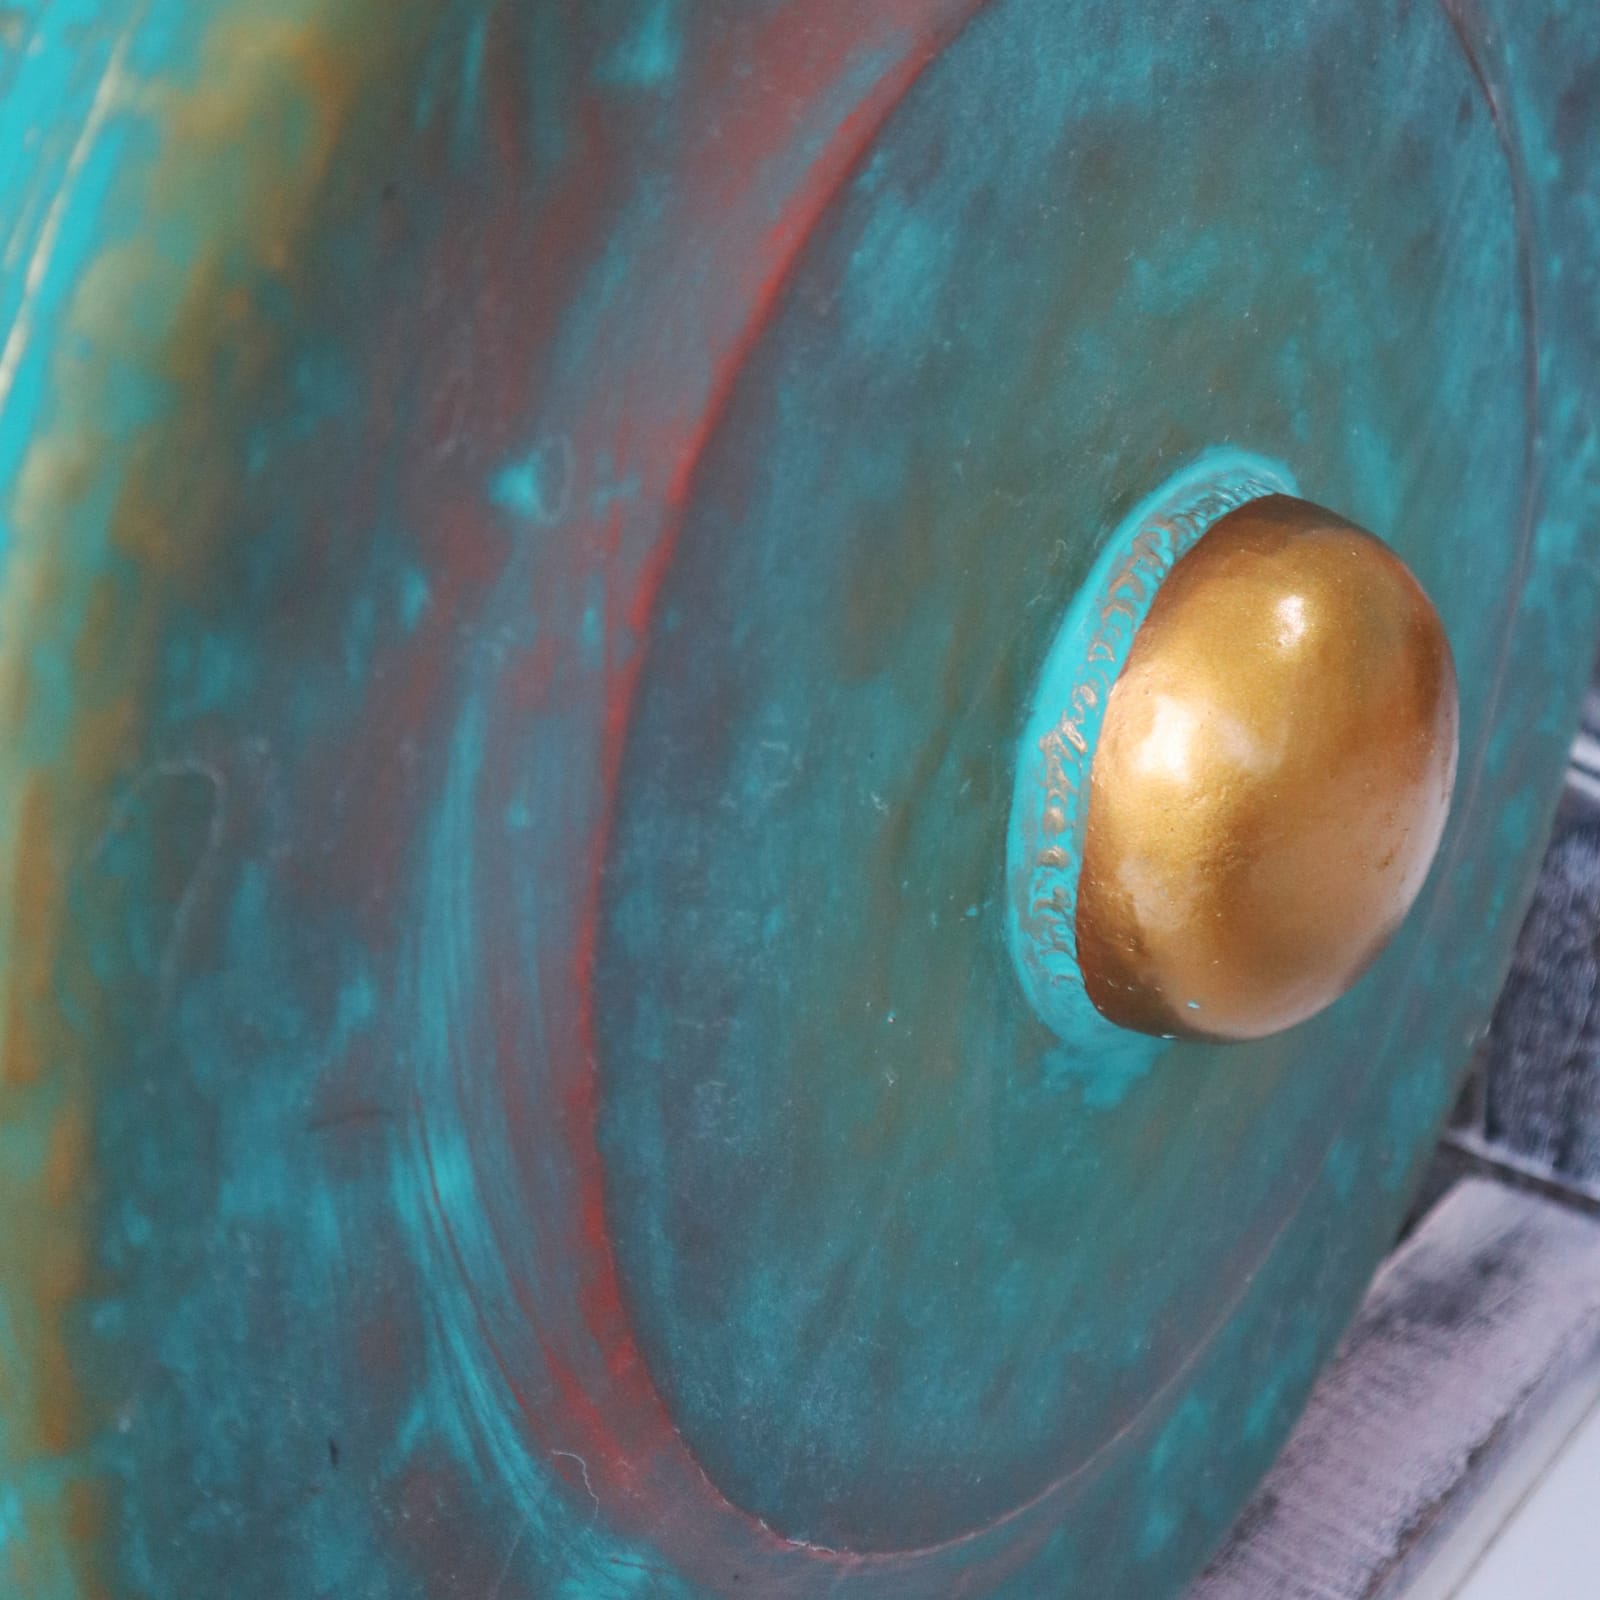 Healing Gong in Stand - 50cm - Greenwash - Positive Faith Hope Love